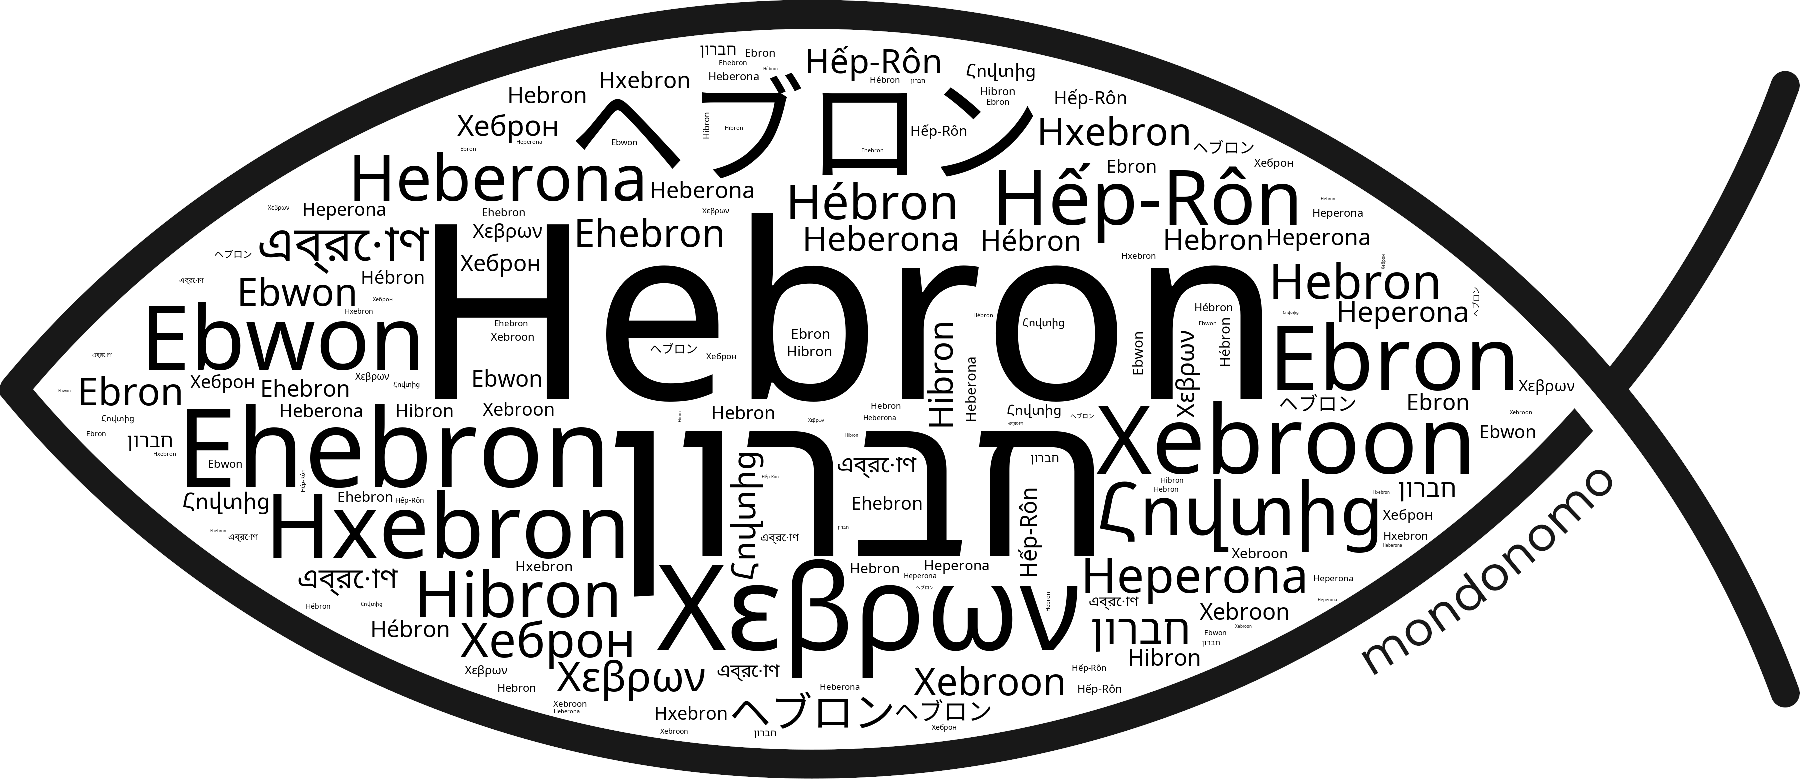 Name Hebron in the world's Bibles